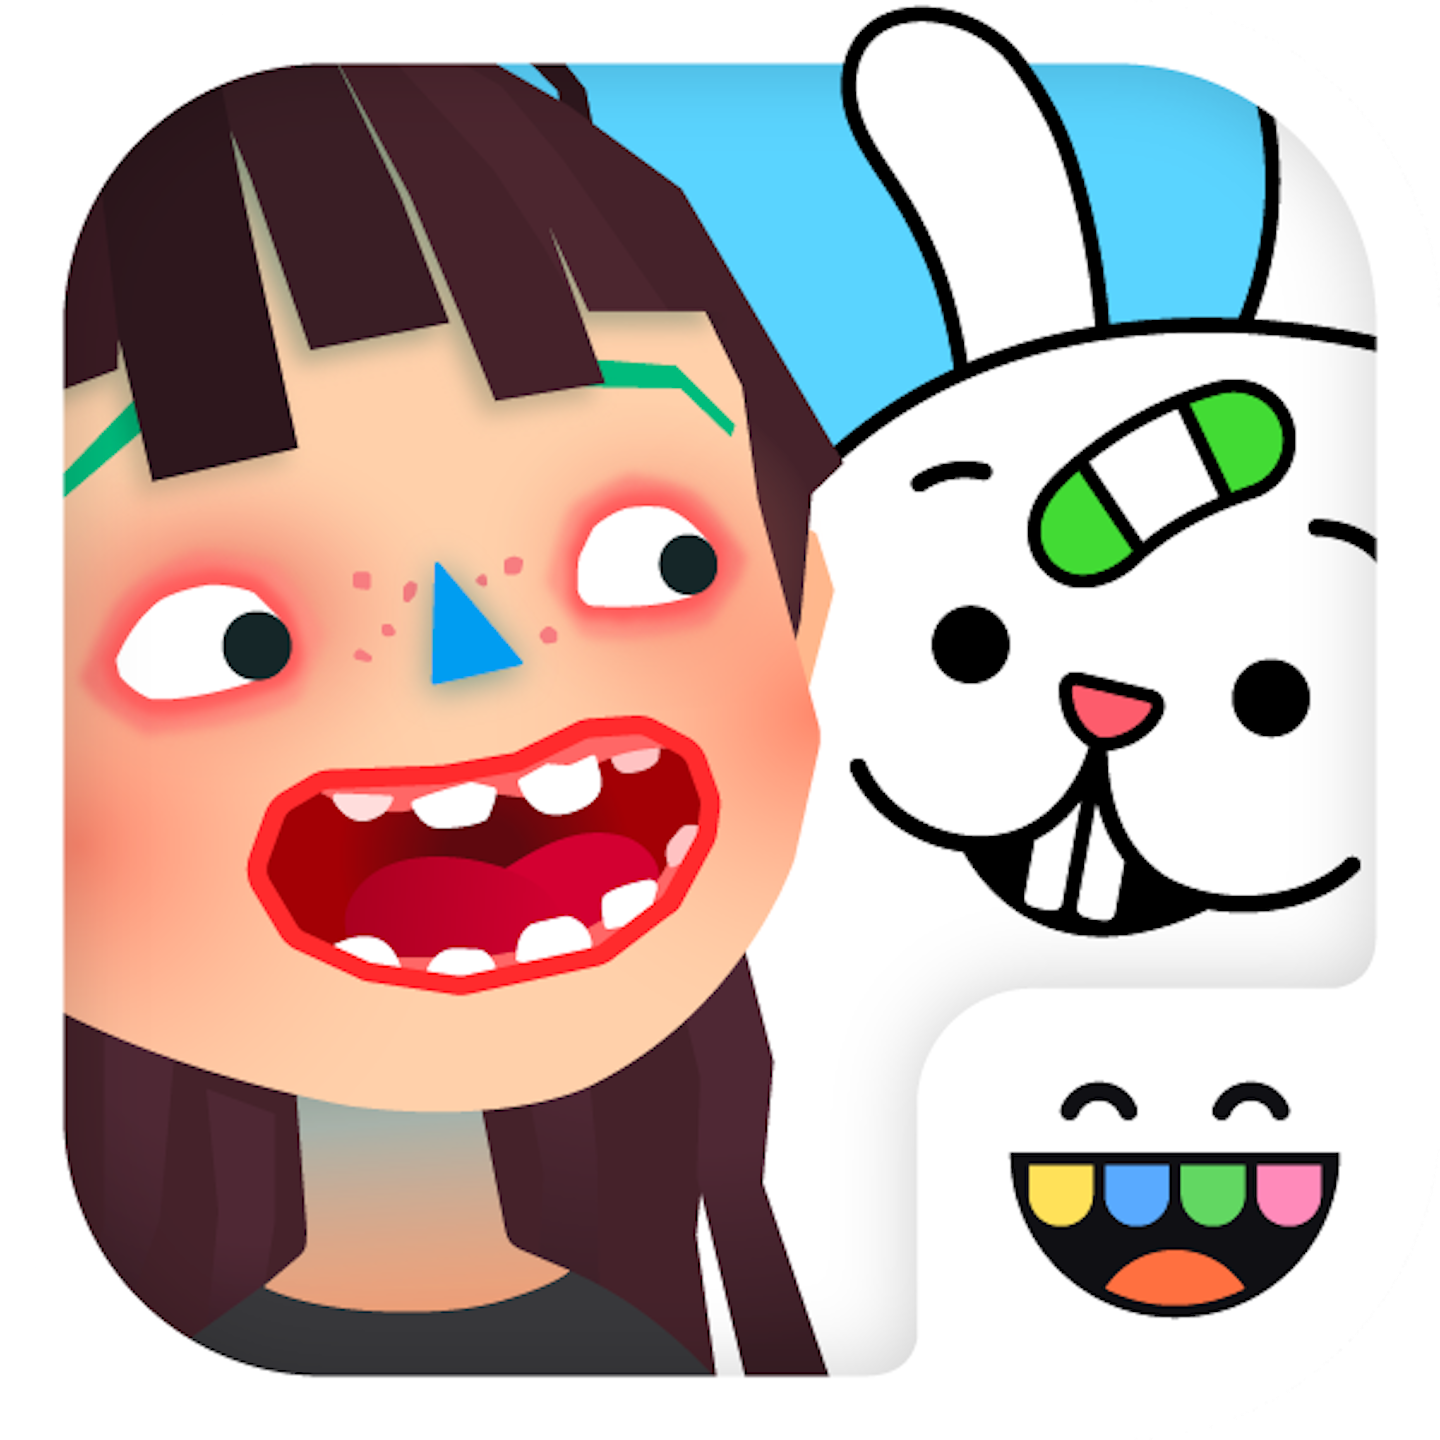 This is the app icon for the Toca Boca Jr app